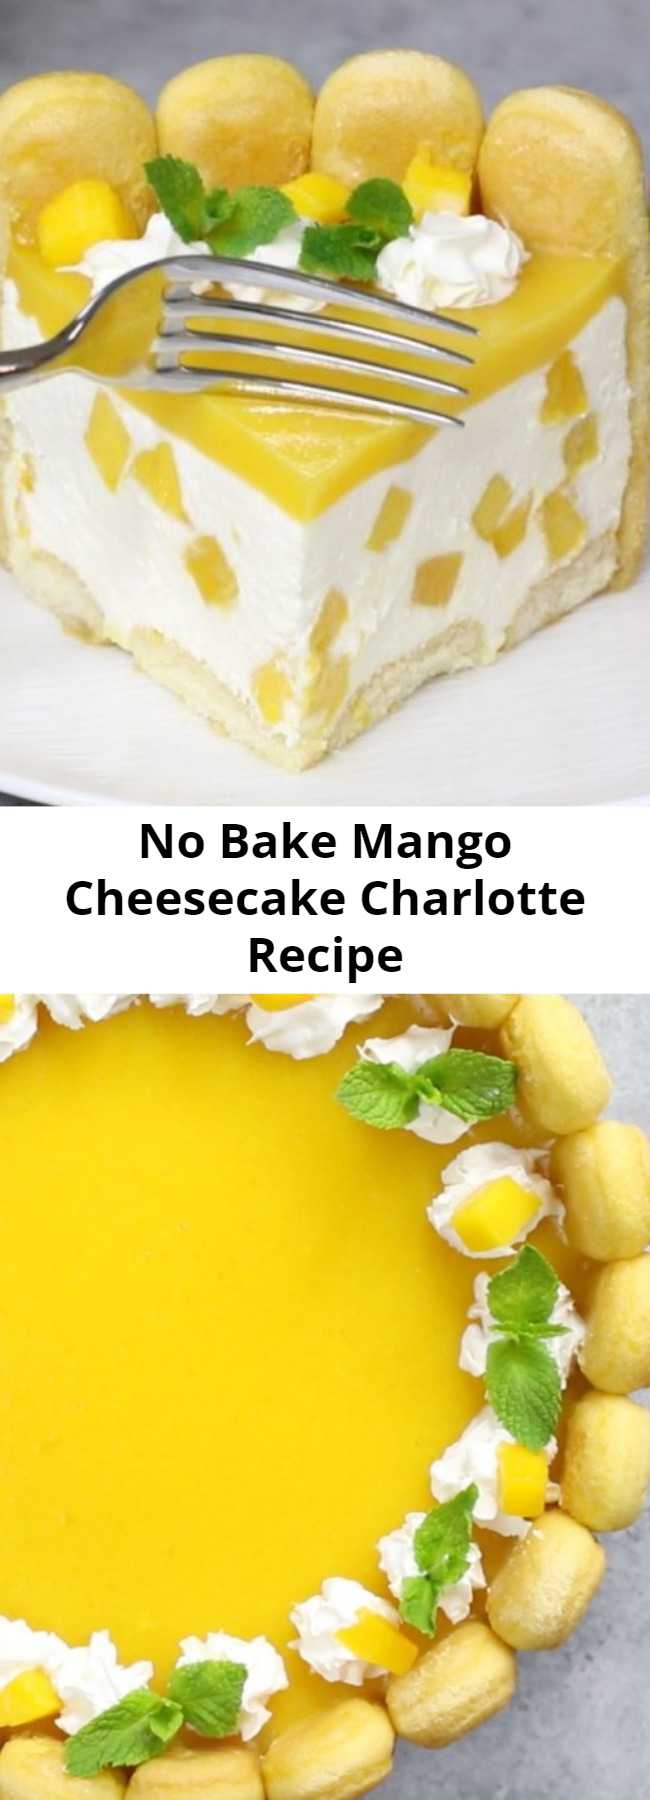 No Bake Mango Cheesecake Charlotte Recipe - Mango Cheesecake Charlotte is an irresistible no bake dessert with a ladyfinger crust, creamy cheesecake filling and a mango glaze on top. It’s a refreshing make-ahead dessert bursting with fruity flavor and perfect for a party. #MangoCheesecake #NobakeCheesecake